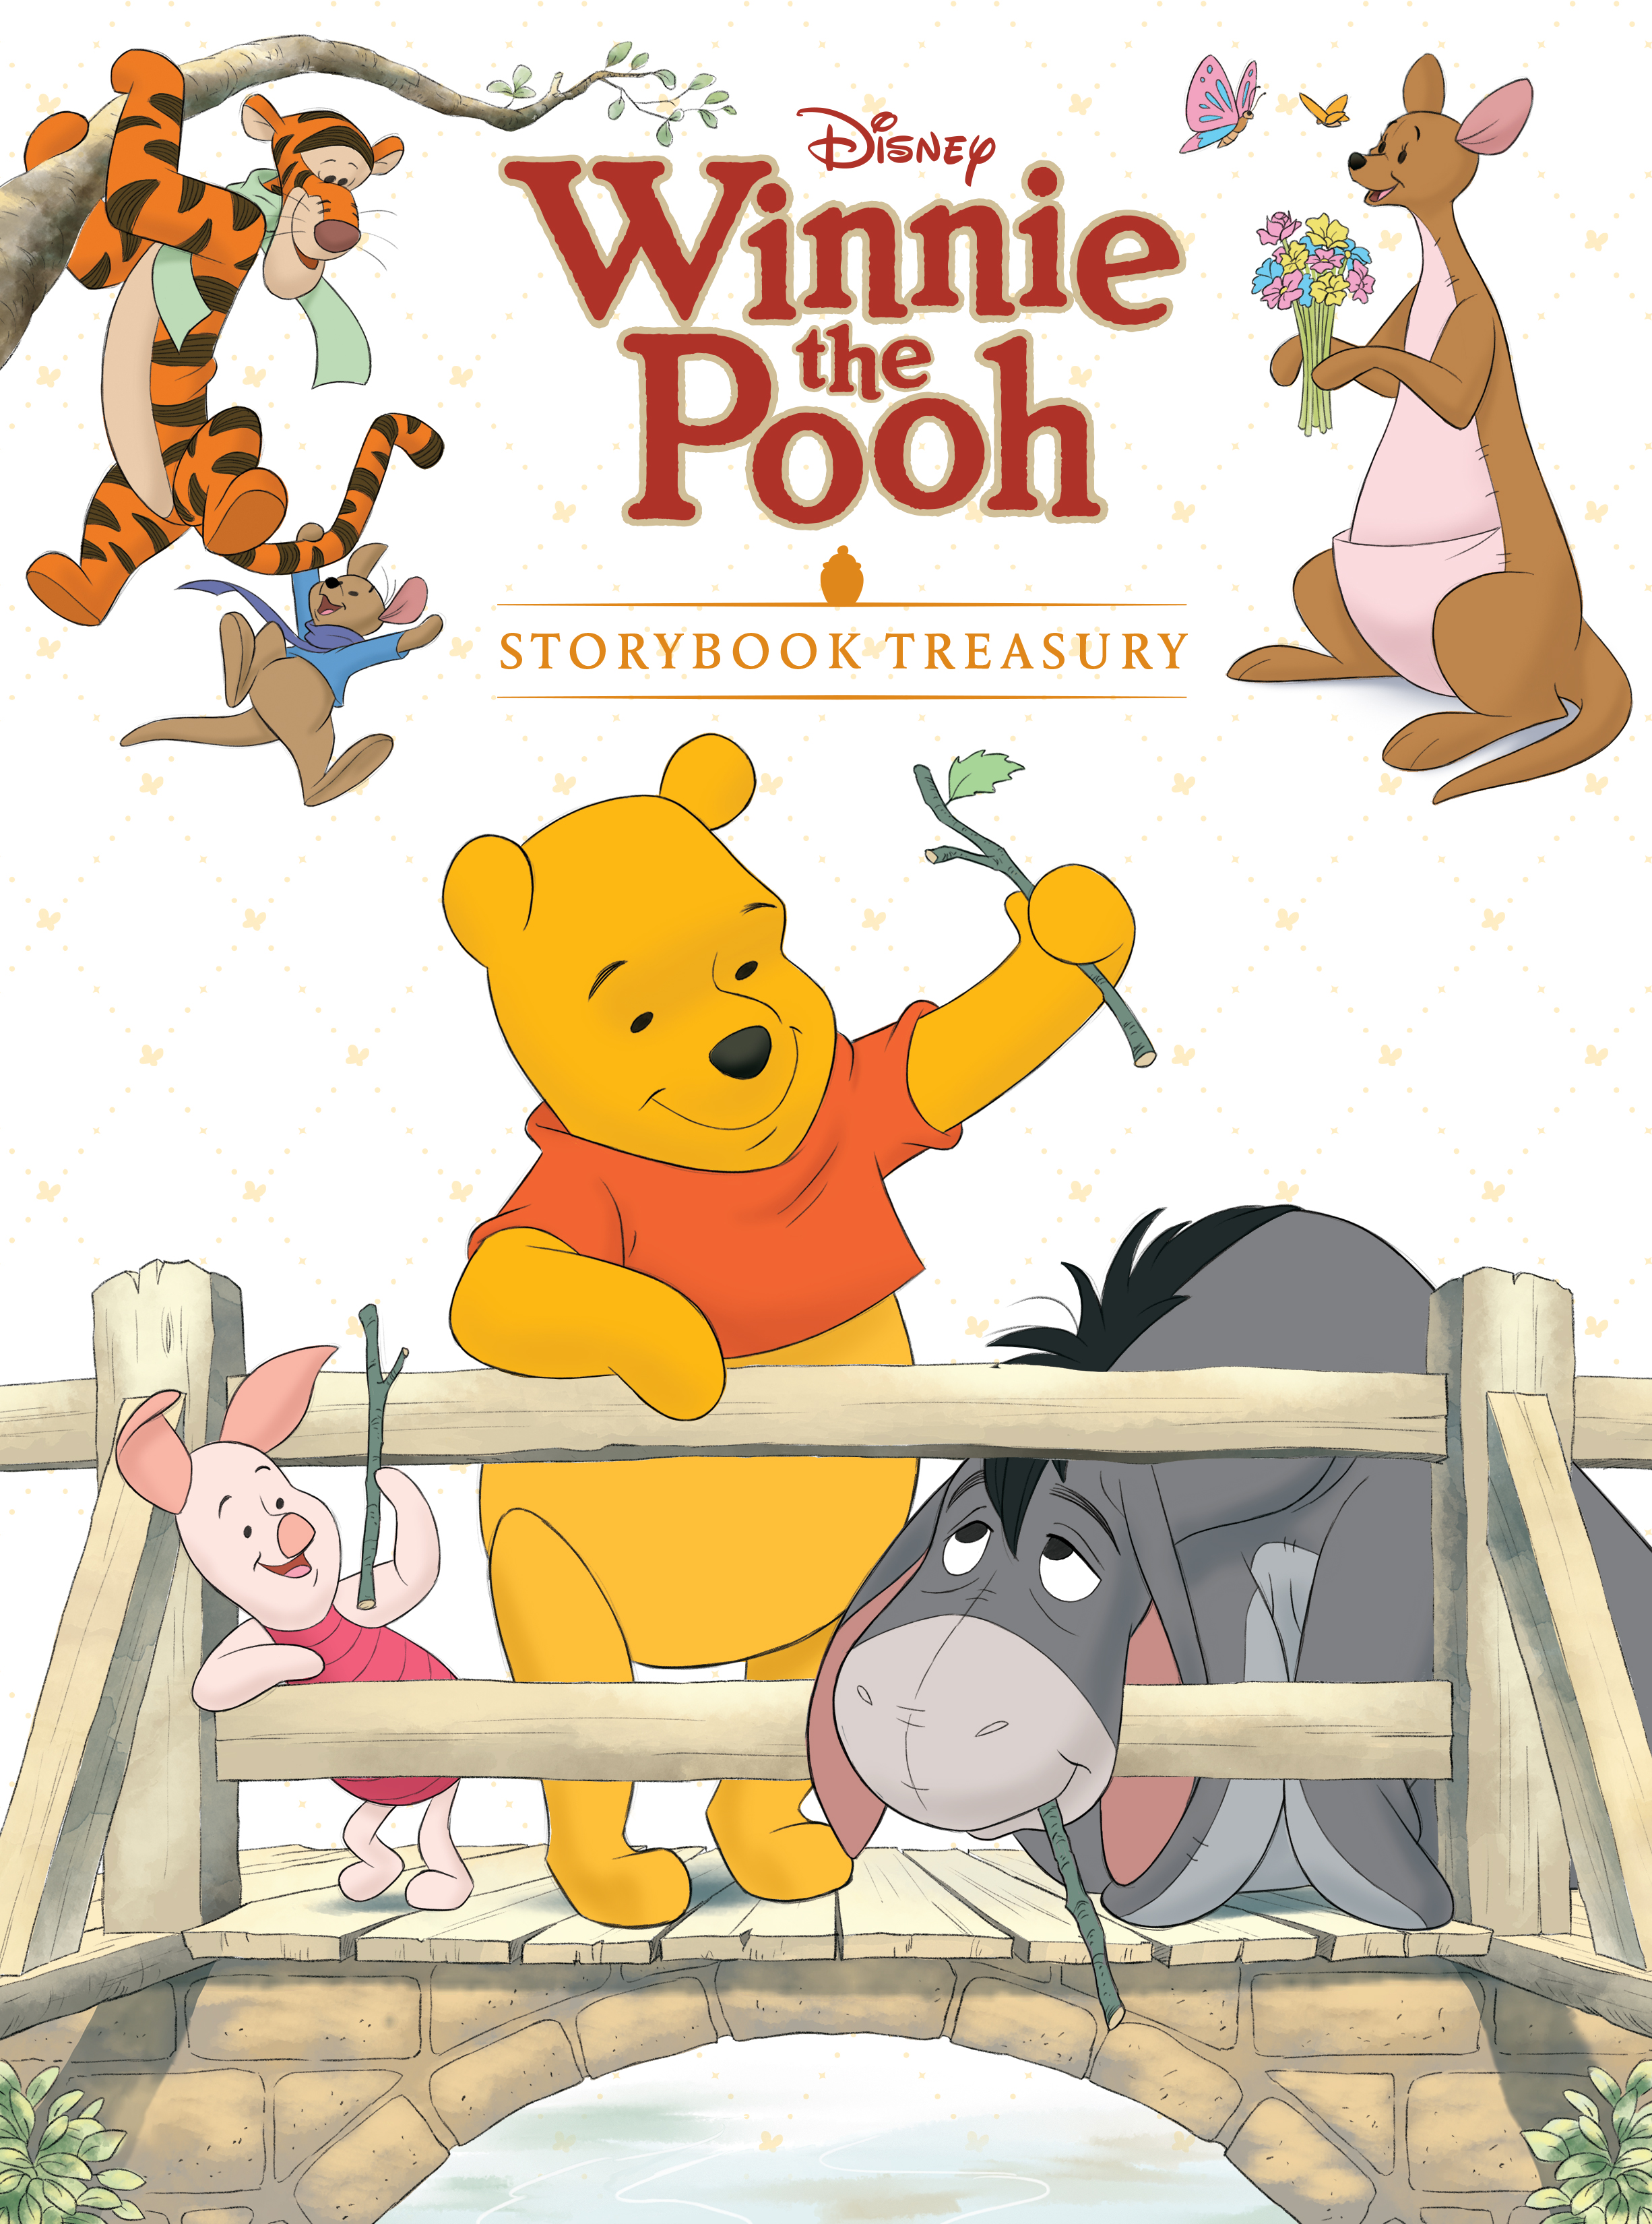 Winnie the Pooh: Adult Colouring Book (Disney)